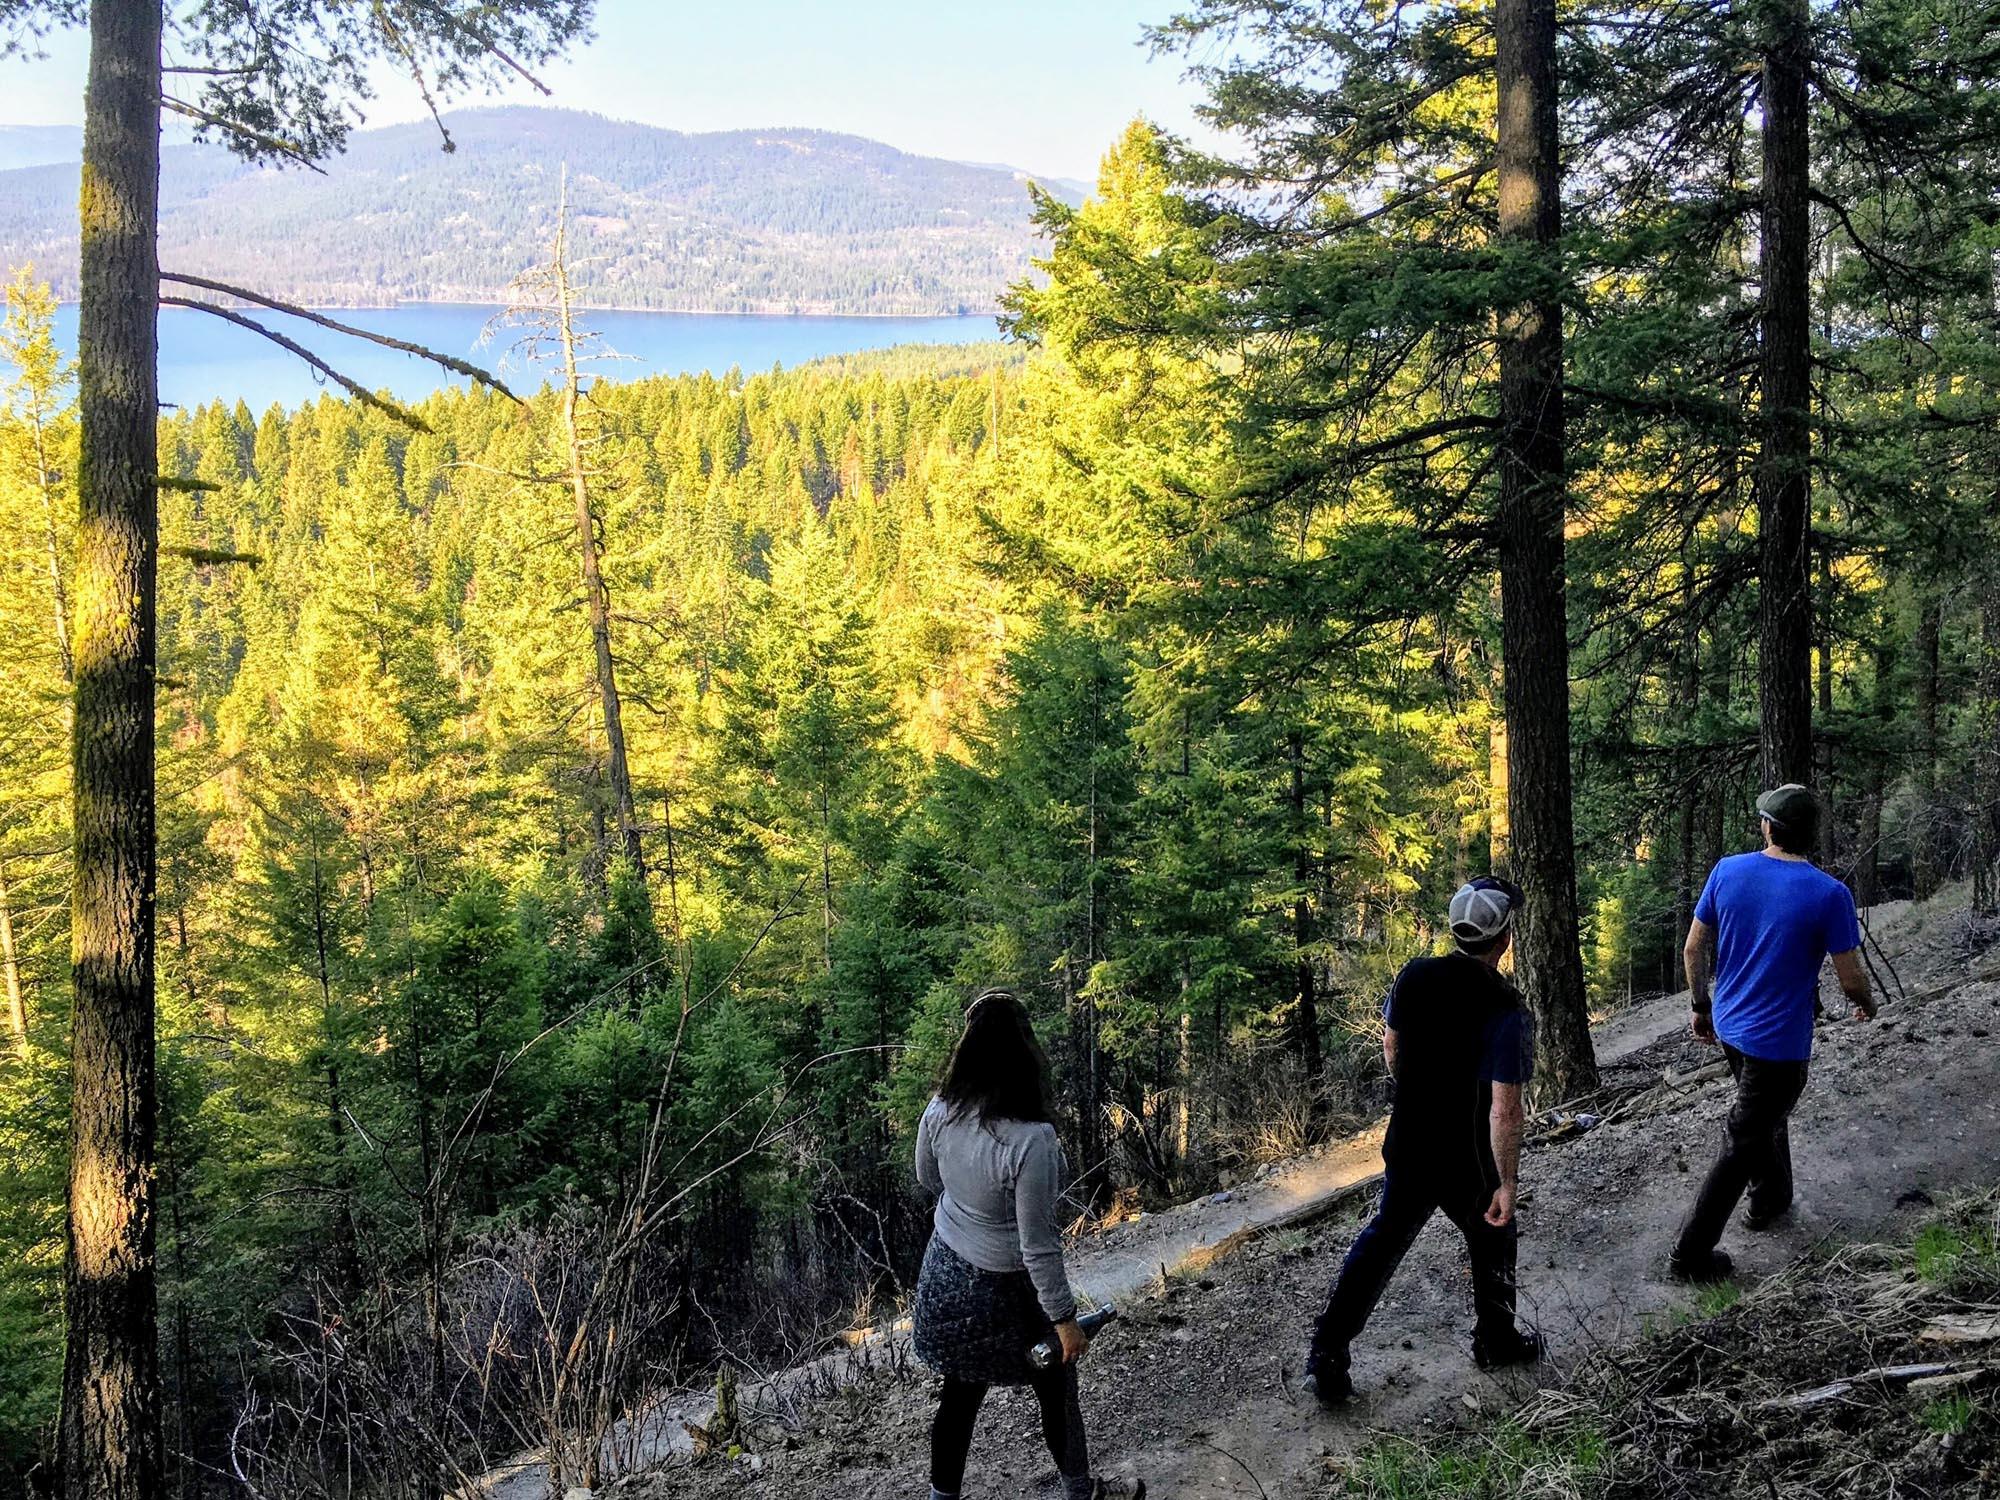 Hiking along The Whitefish Trail in Haskill Basin